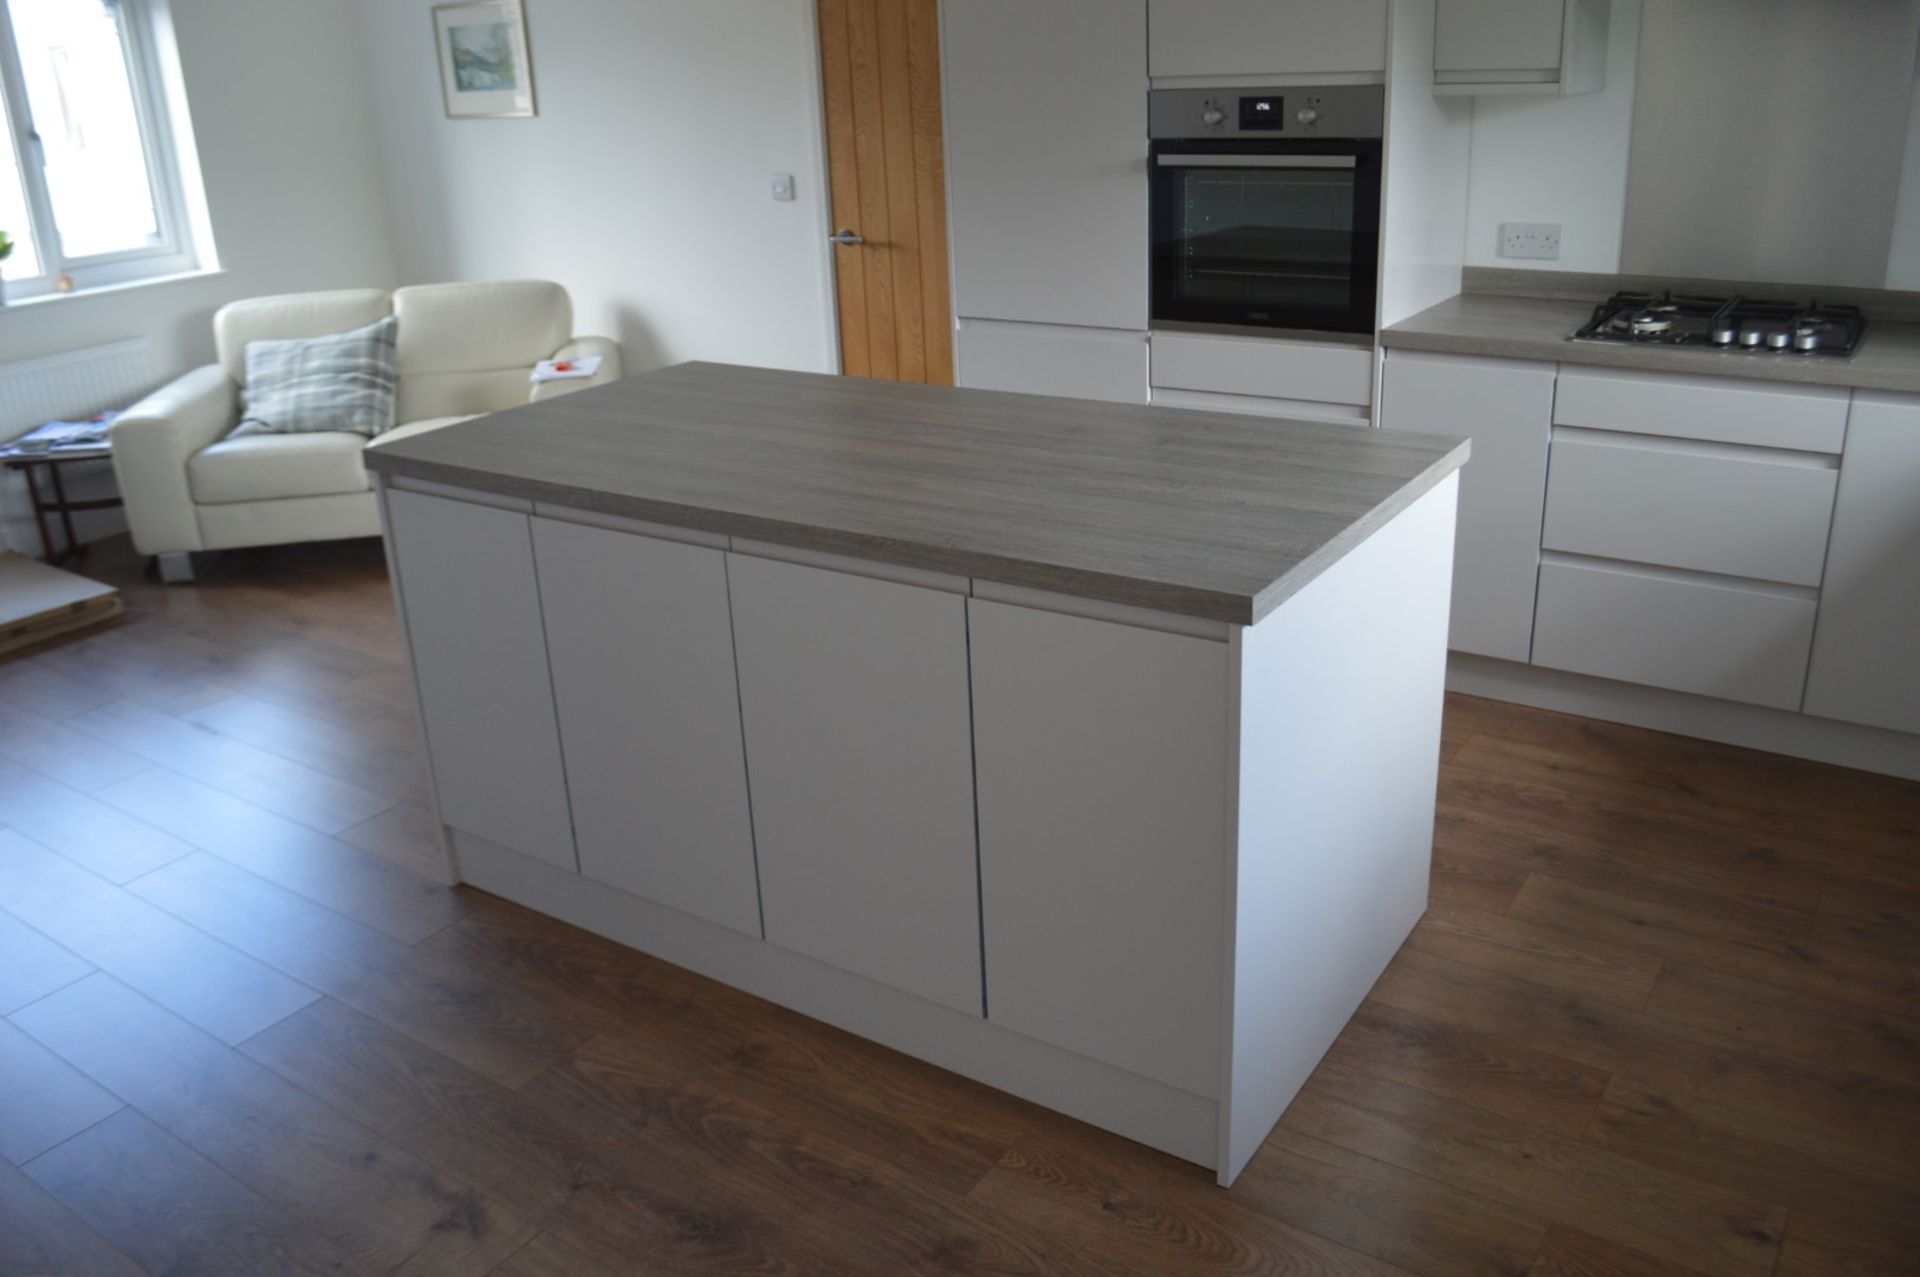 1 x Contemporary Handleless Fitted Kitchen Featuring A White Finish, Laminate Worktops, And - Image 25 of 28